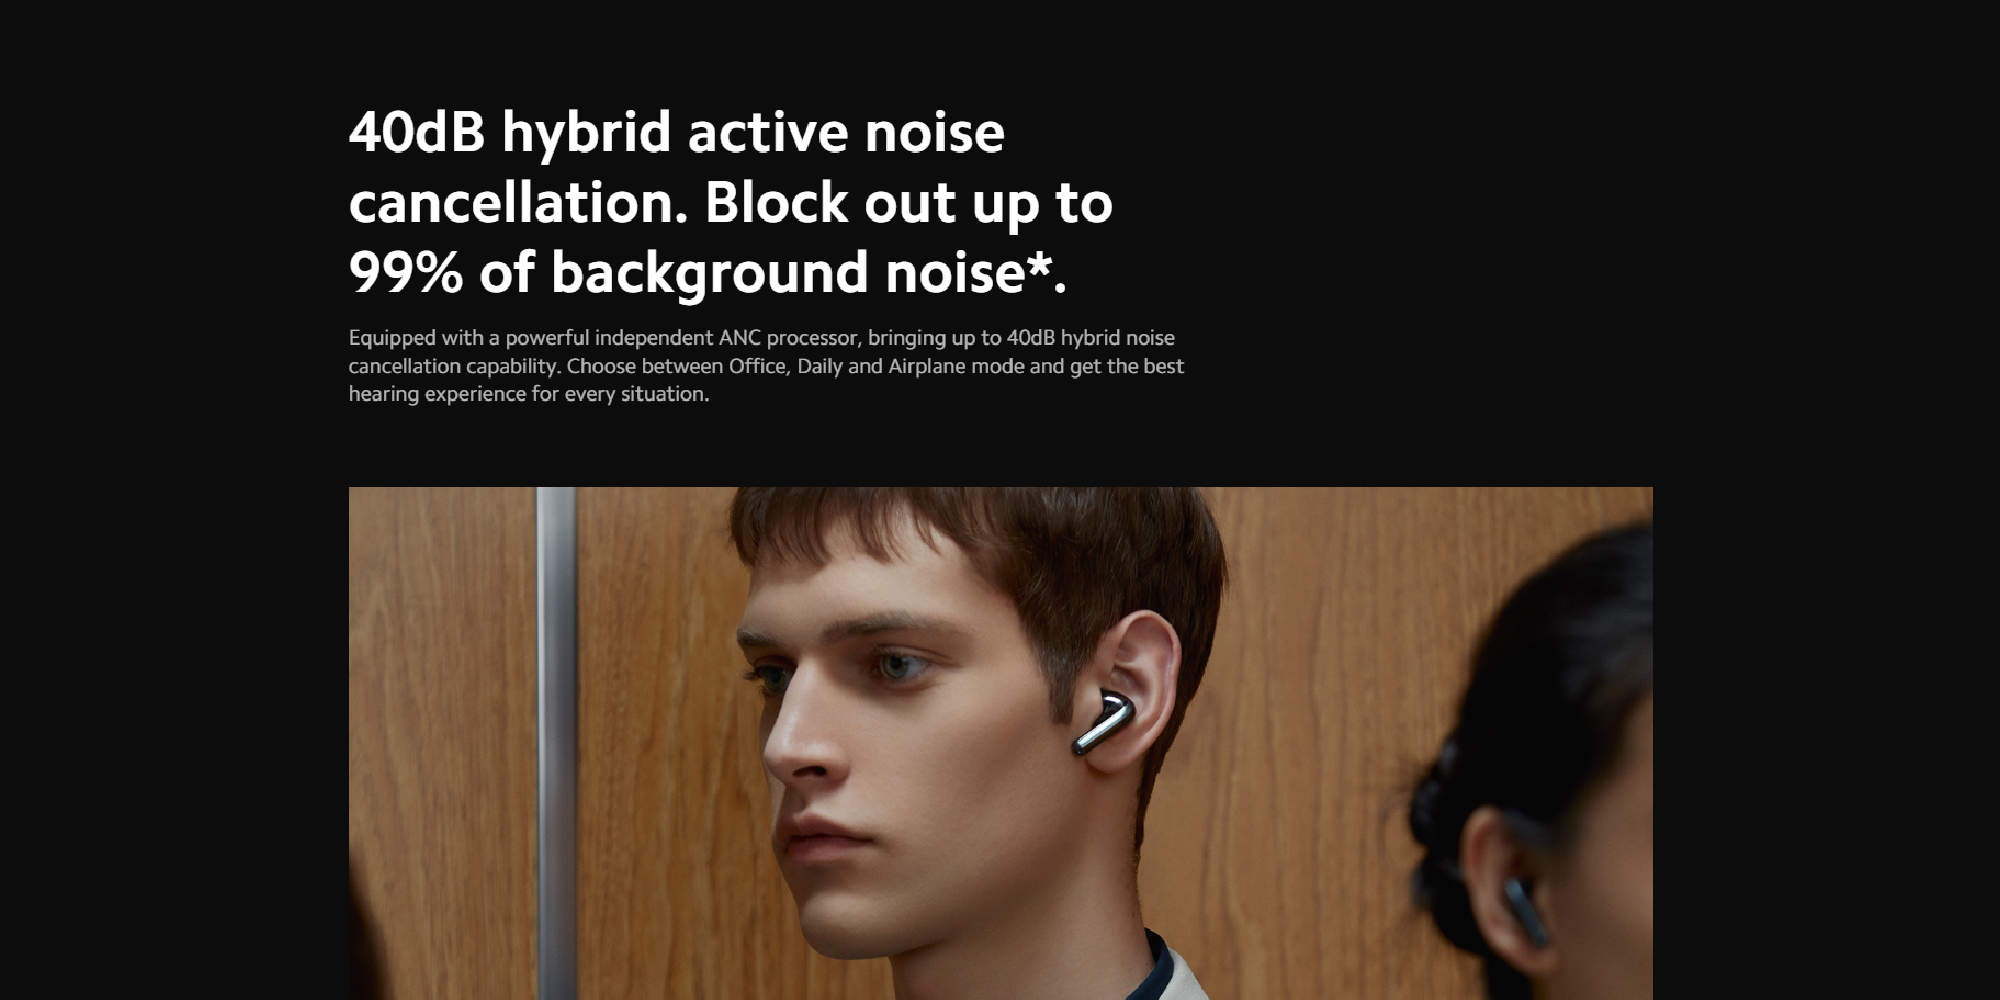 Xiaomi FlipBuds Pro: Wireless Earbuds with Hi-Res Audio Support, Dual Dynamic Drivers, 40dB ANC, 3 ANC Modes, IPX5 Rated